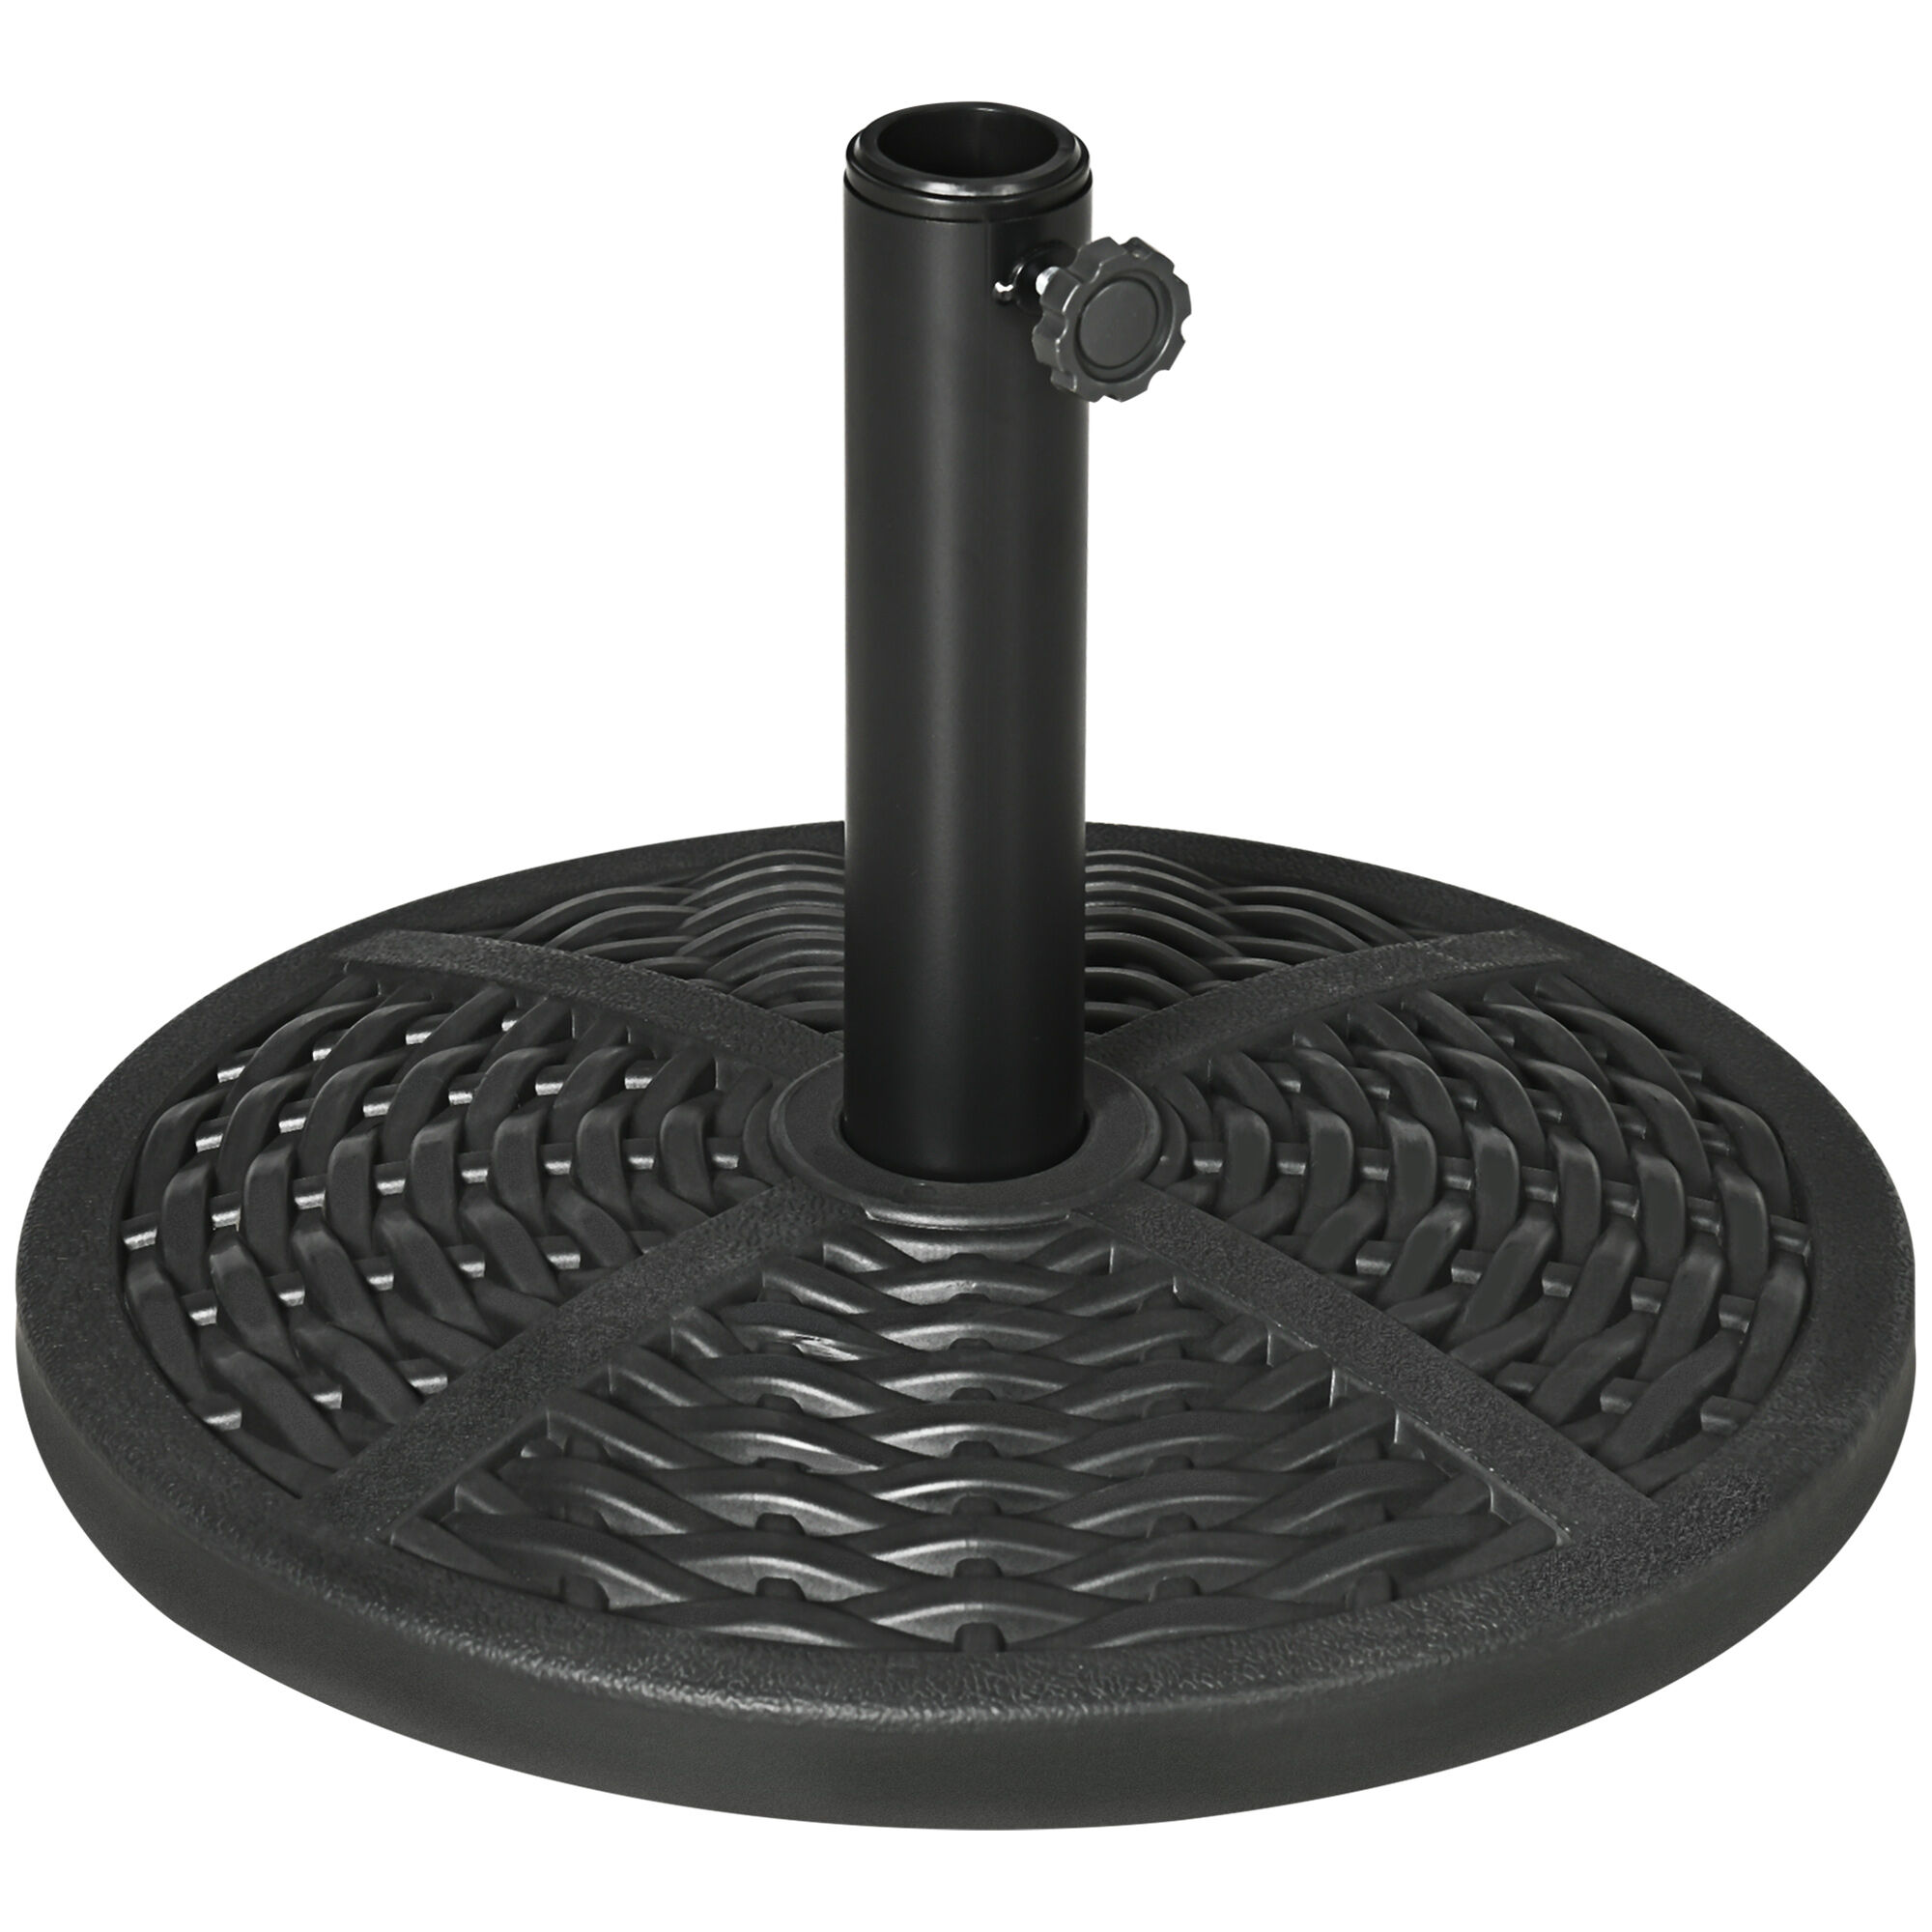 Outsunny 21 lbs. Outdoor Market Umbrella Base Holder, 18" Heavy Duty Round Umbrella Stand Pole with Rattan Design for Patio, Black